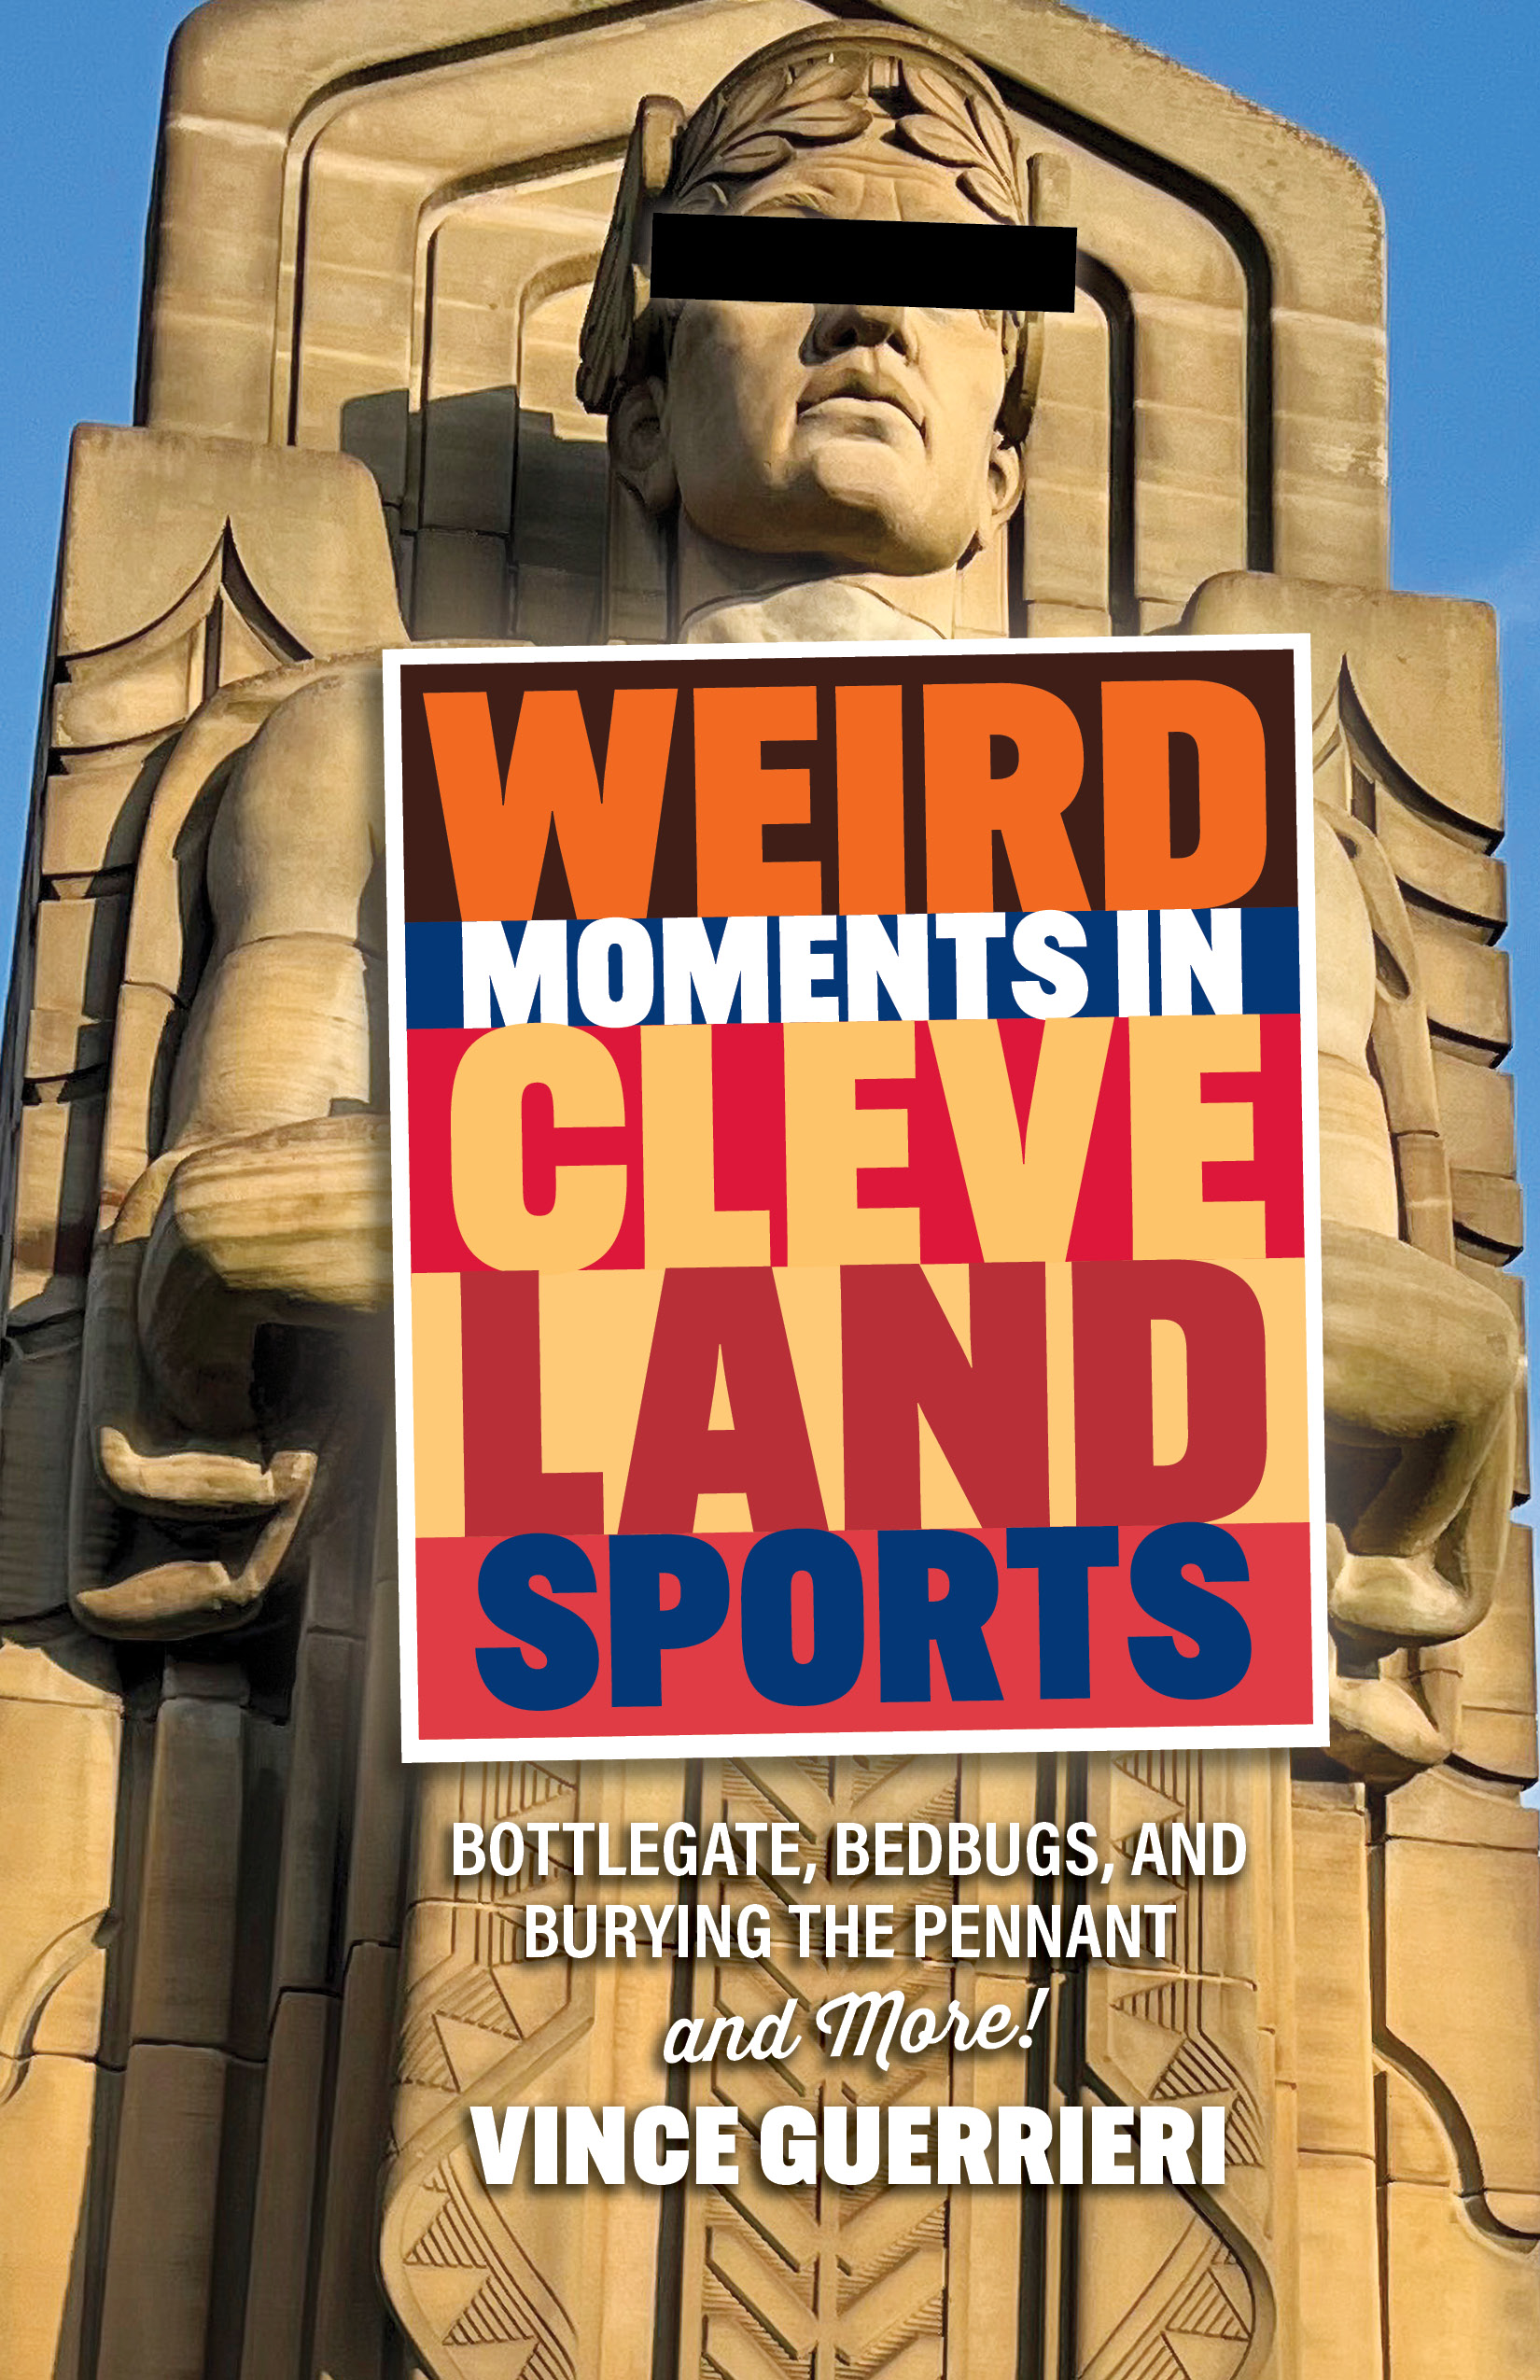 Weird Moments in Cleveland Sports by Vince Guerrieri